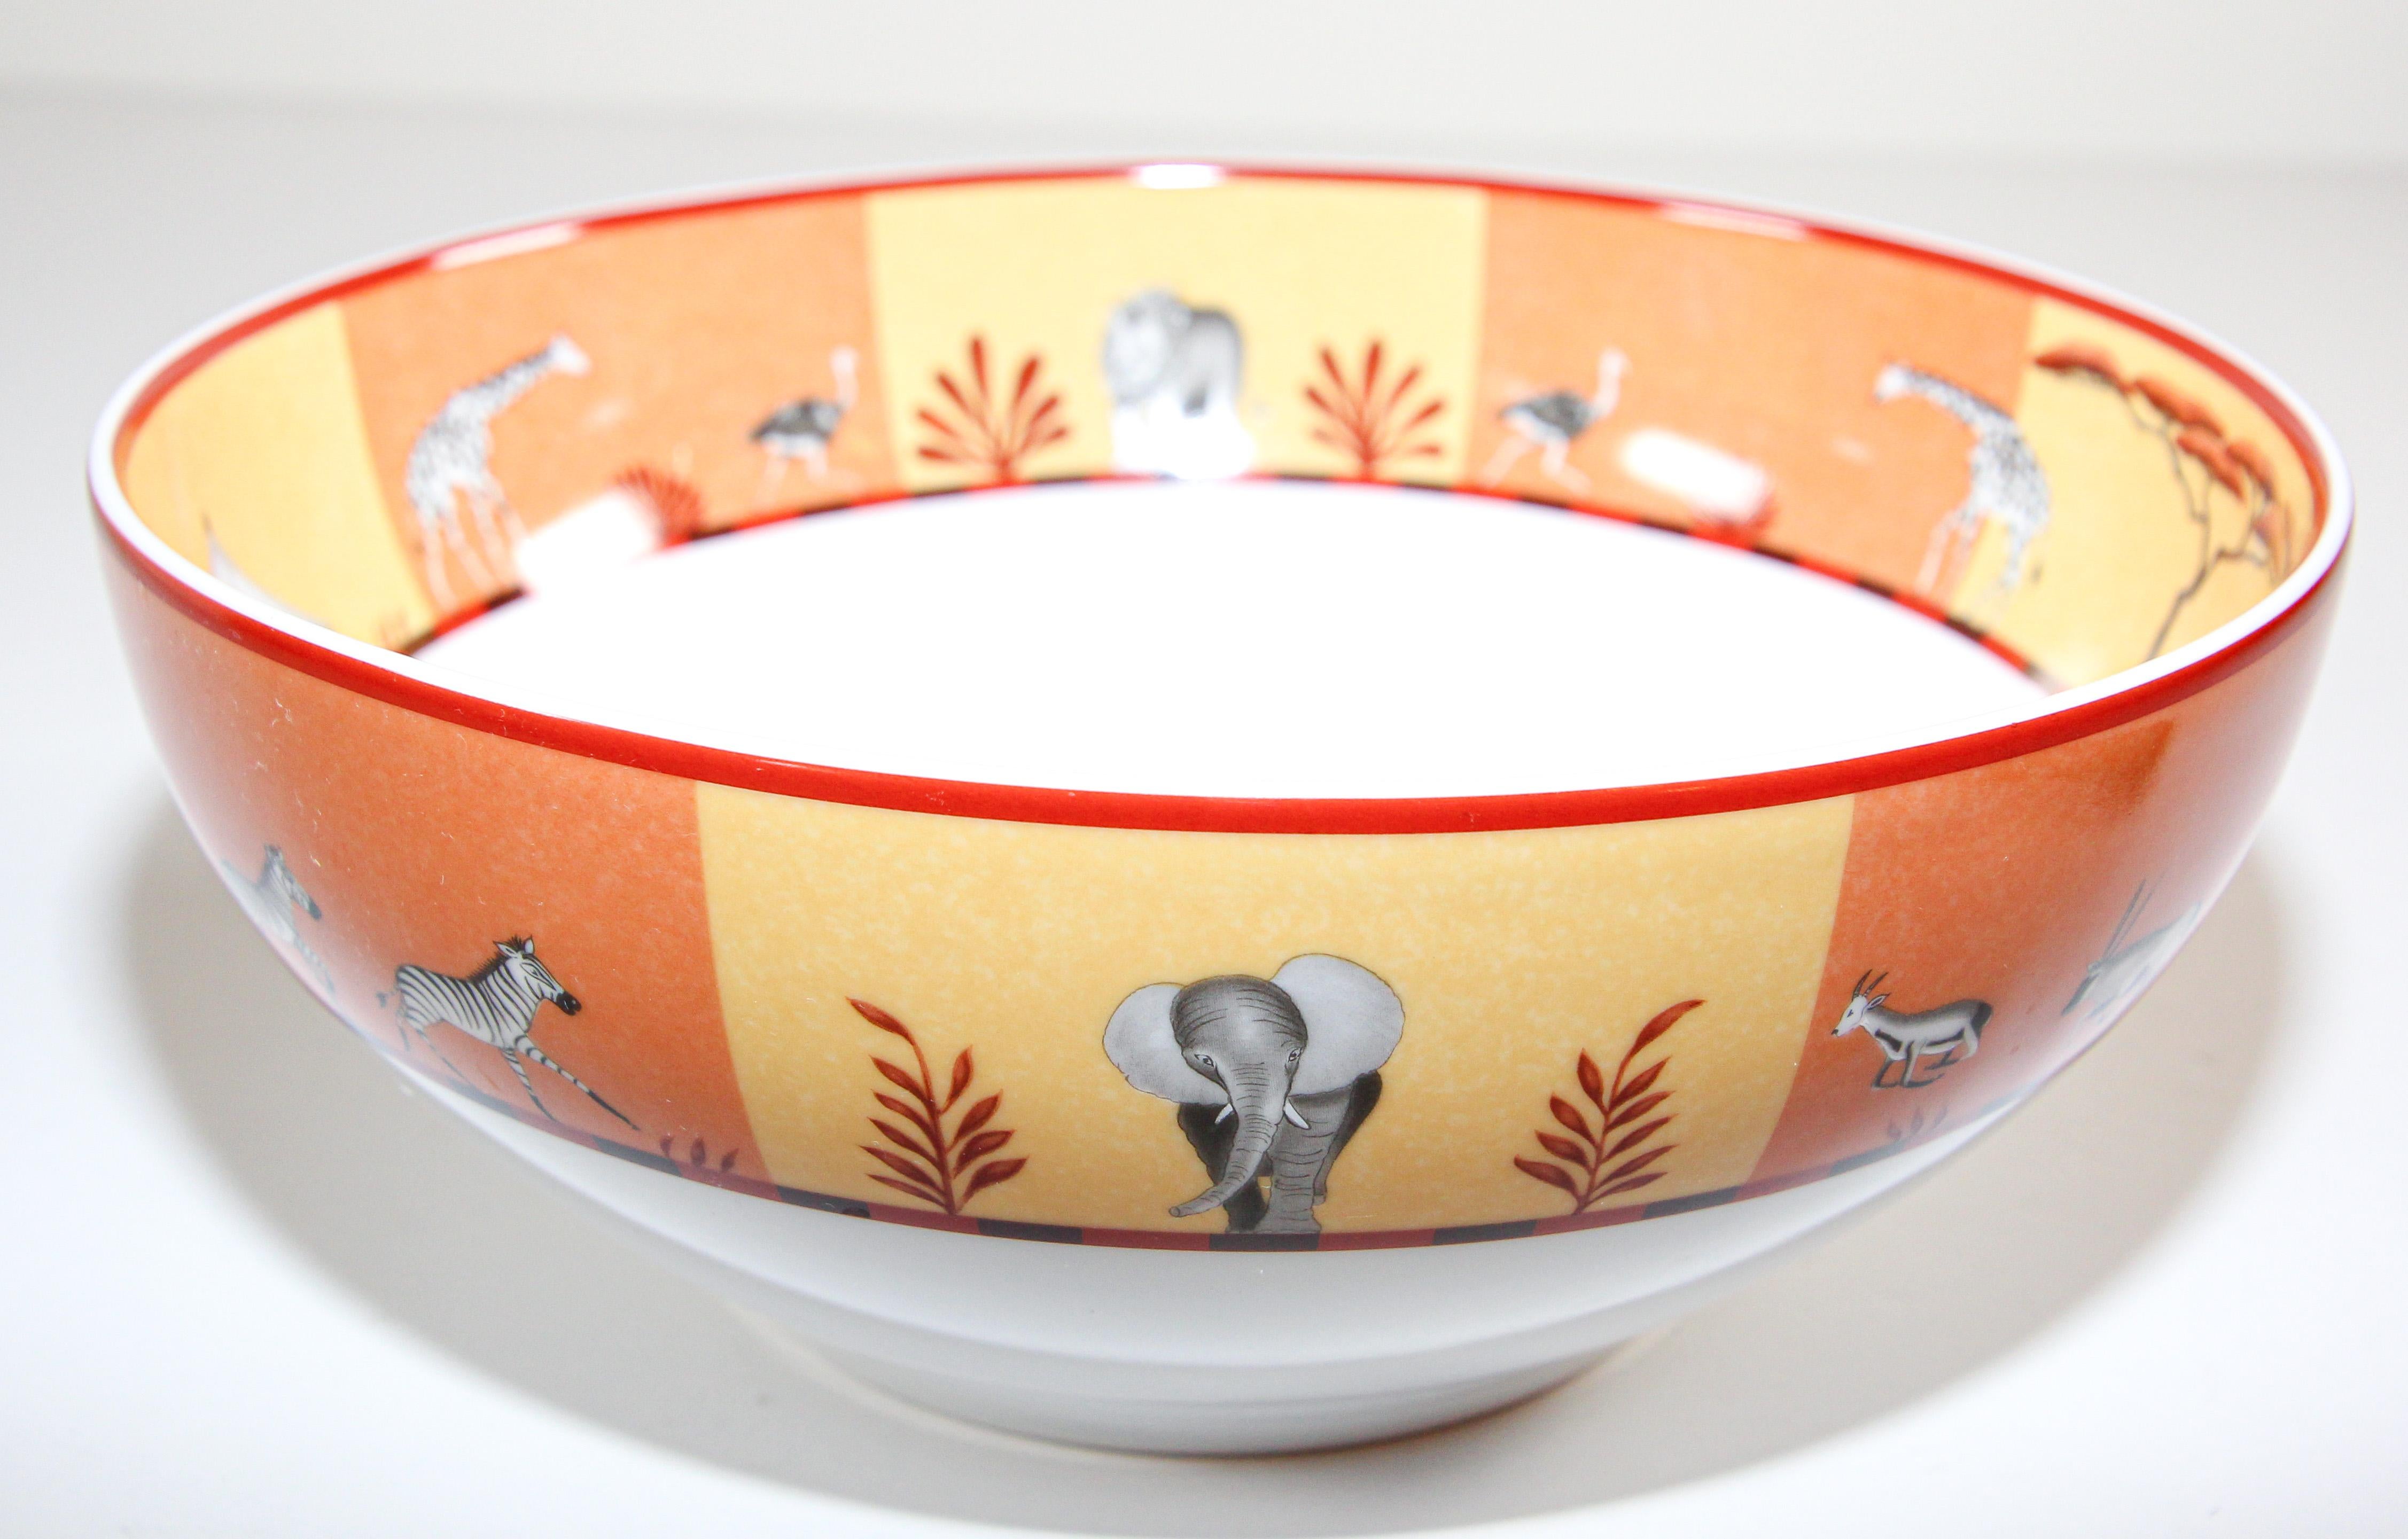 Hermès porcelain Africa orange large salad bowl or pasta bowl with Safari animals design.
in the Africa pattern by Hermes, this lovely rimmed salad, pasta or fruit bowl features white fine bone china decorated with a wide orange and yellow border